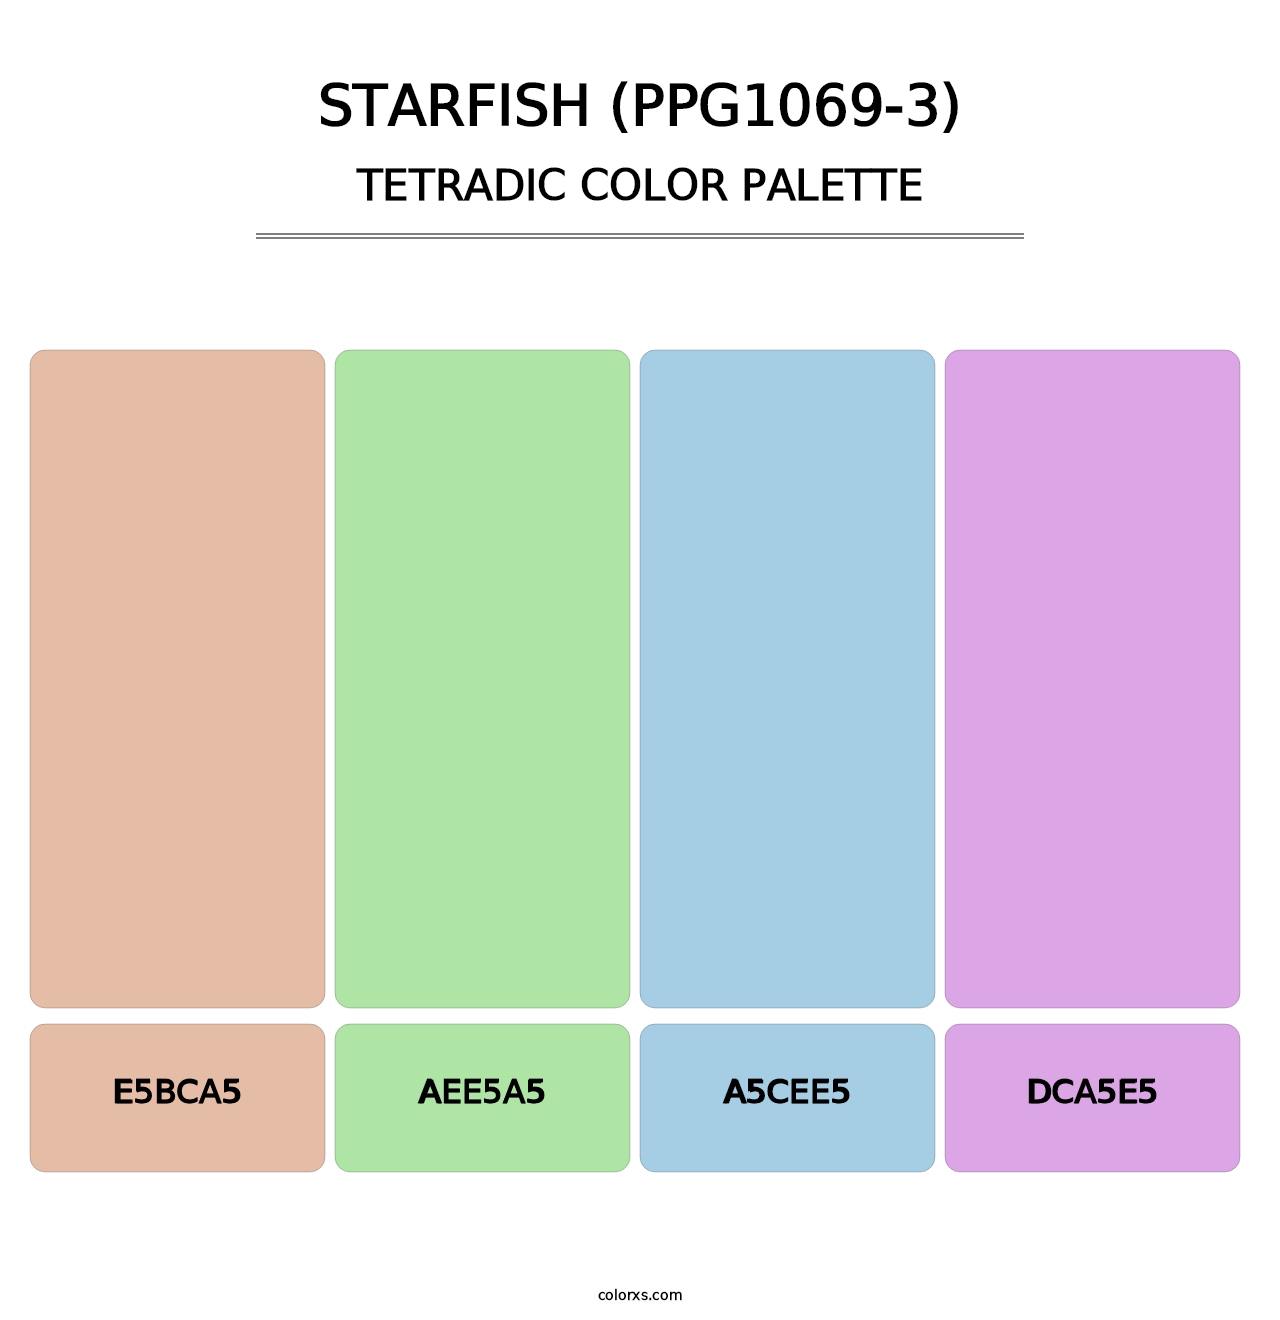 Starfish (PPG1069-3) - Tetradic Color Palette